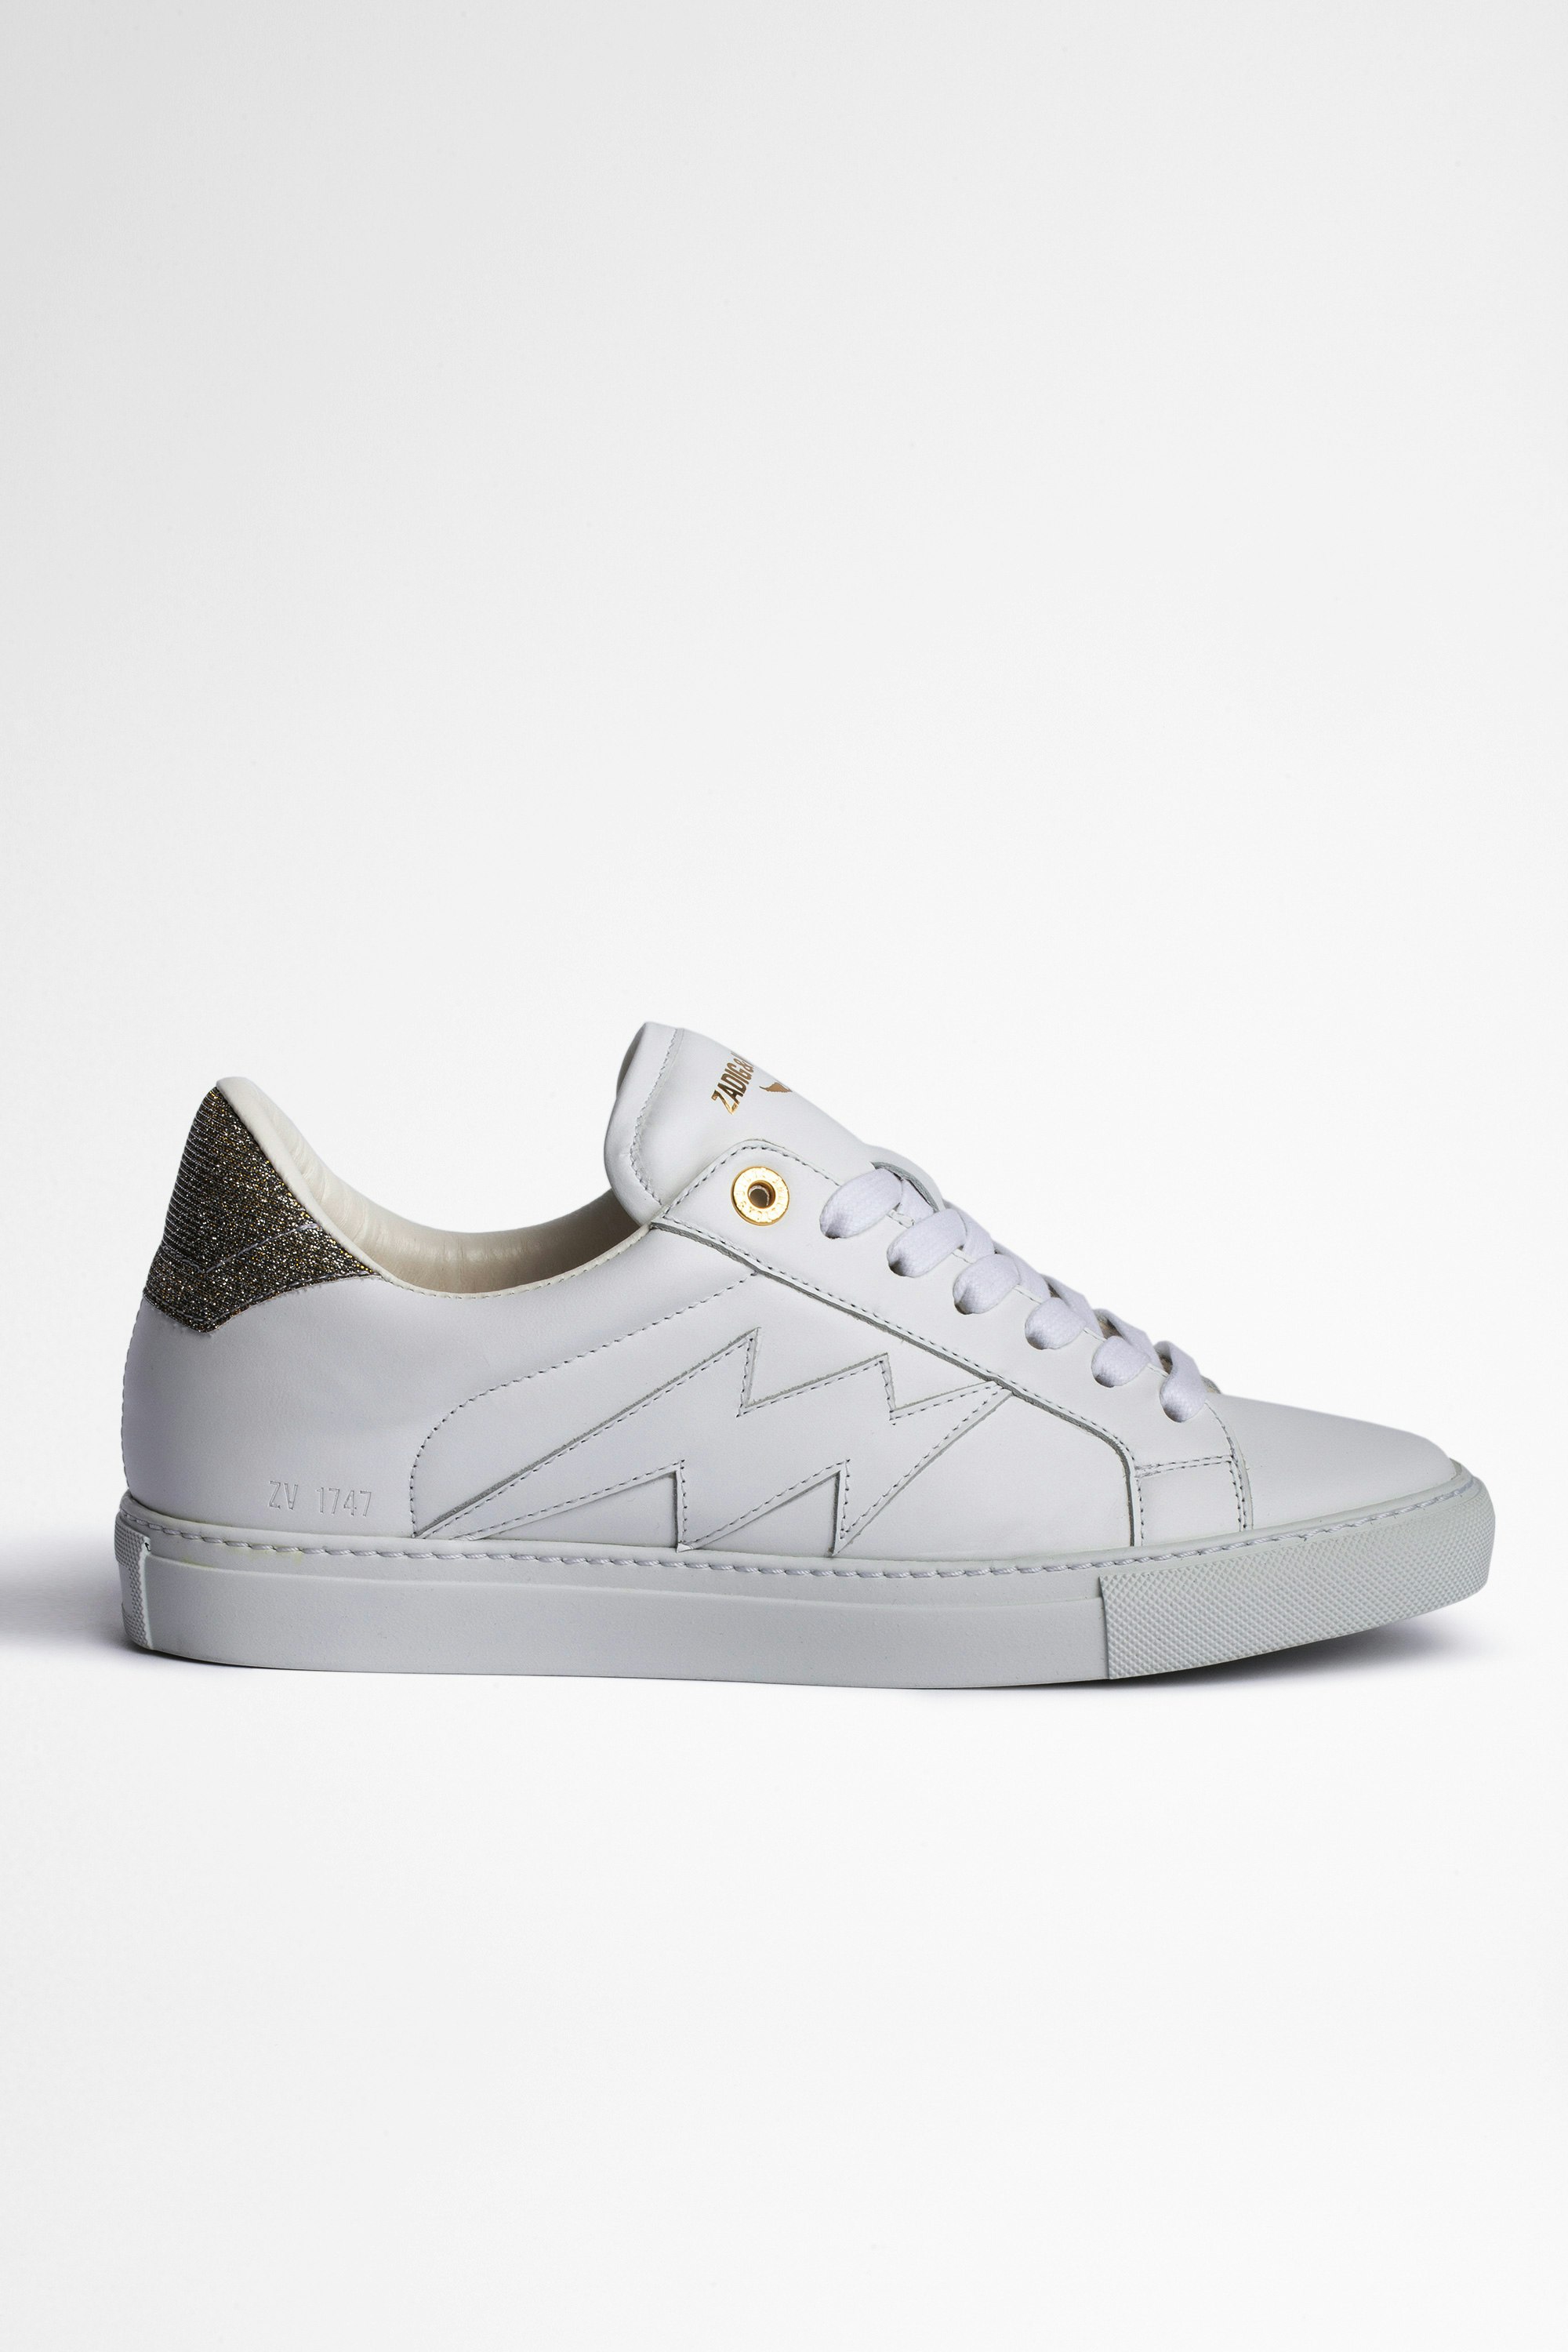 ZV1747 レザースニーカー Women's smooth white leather trainers with glitter patch on back